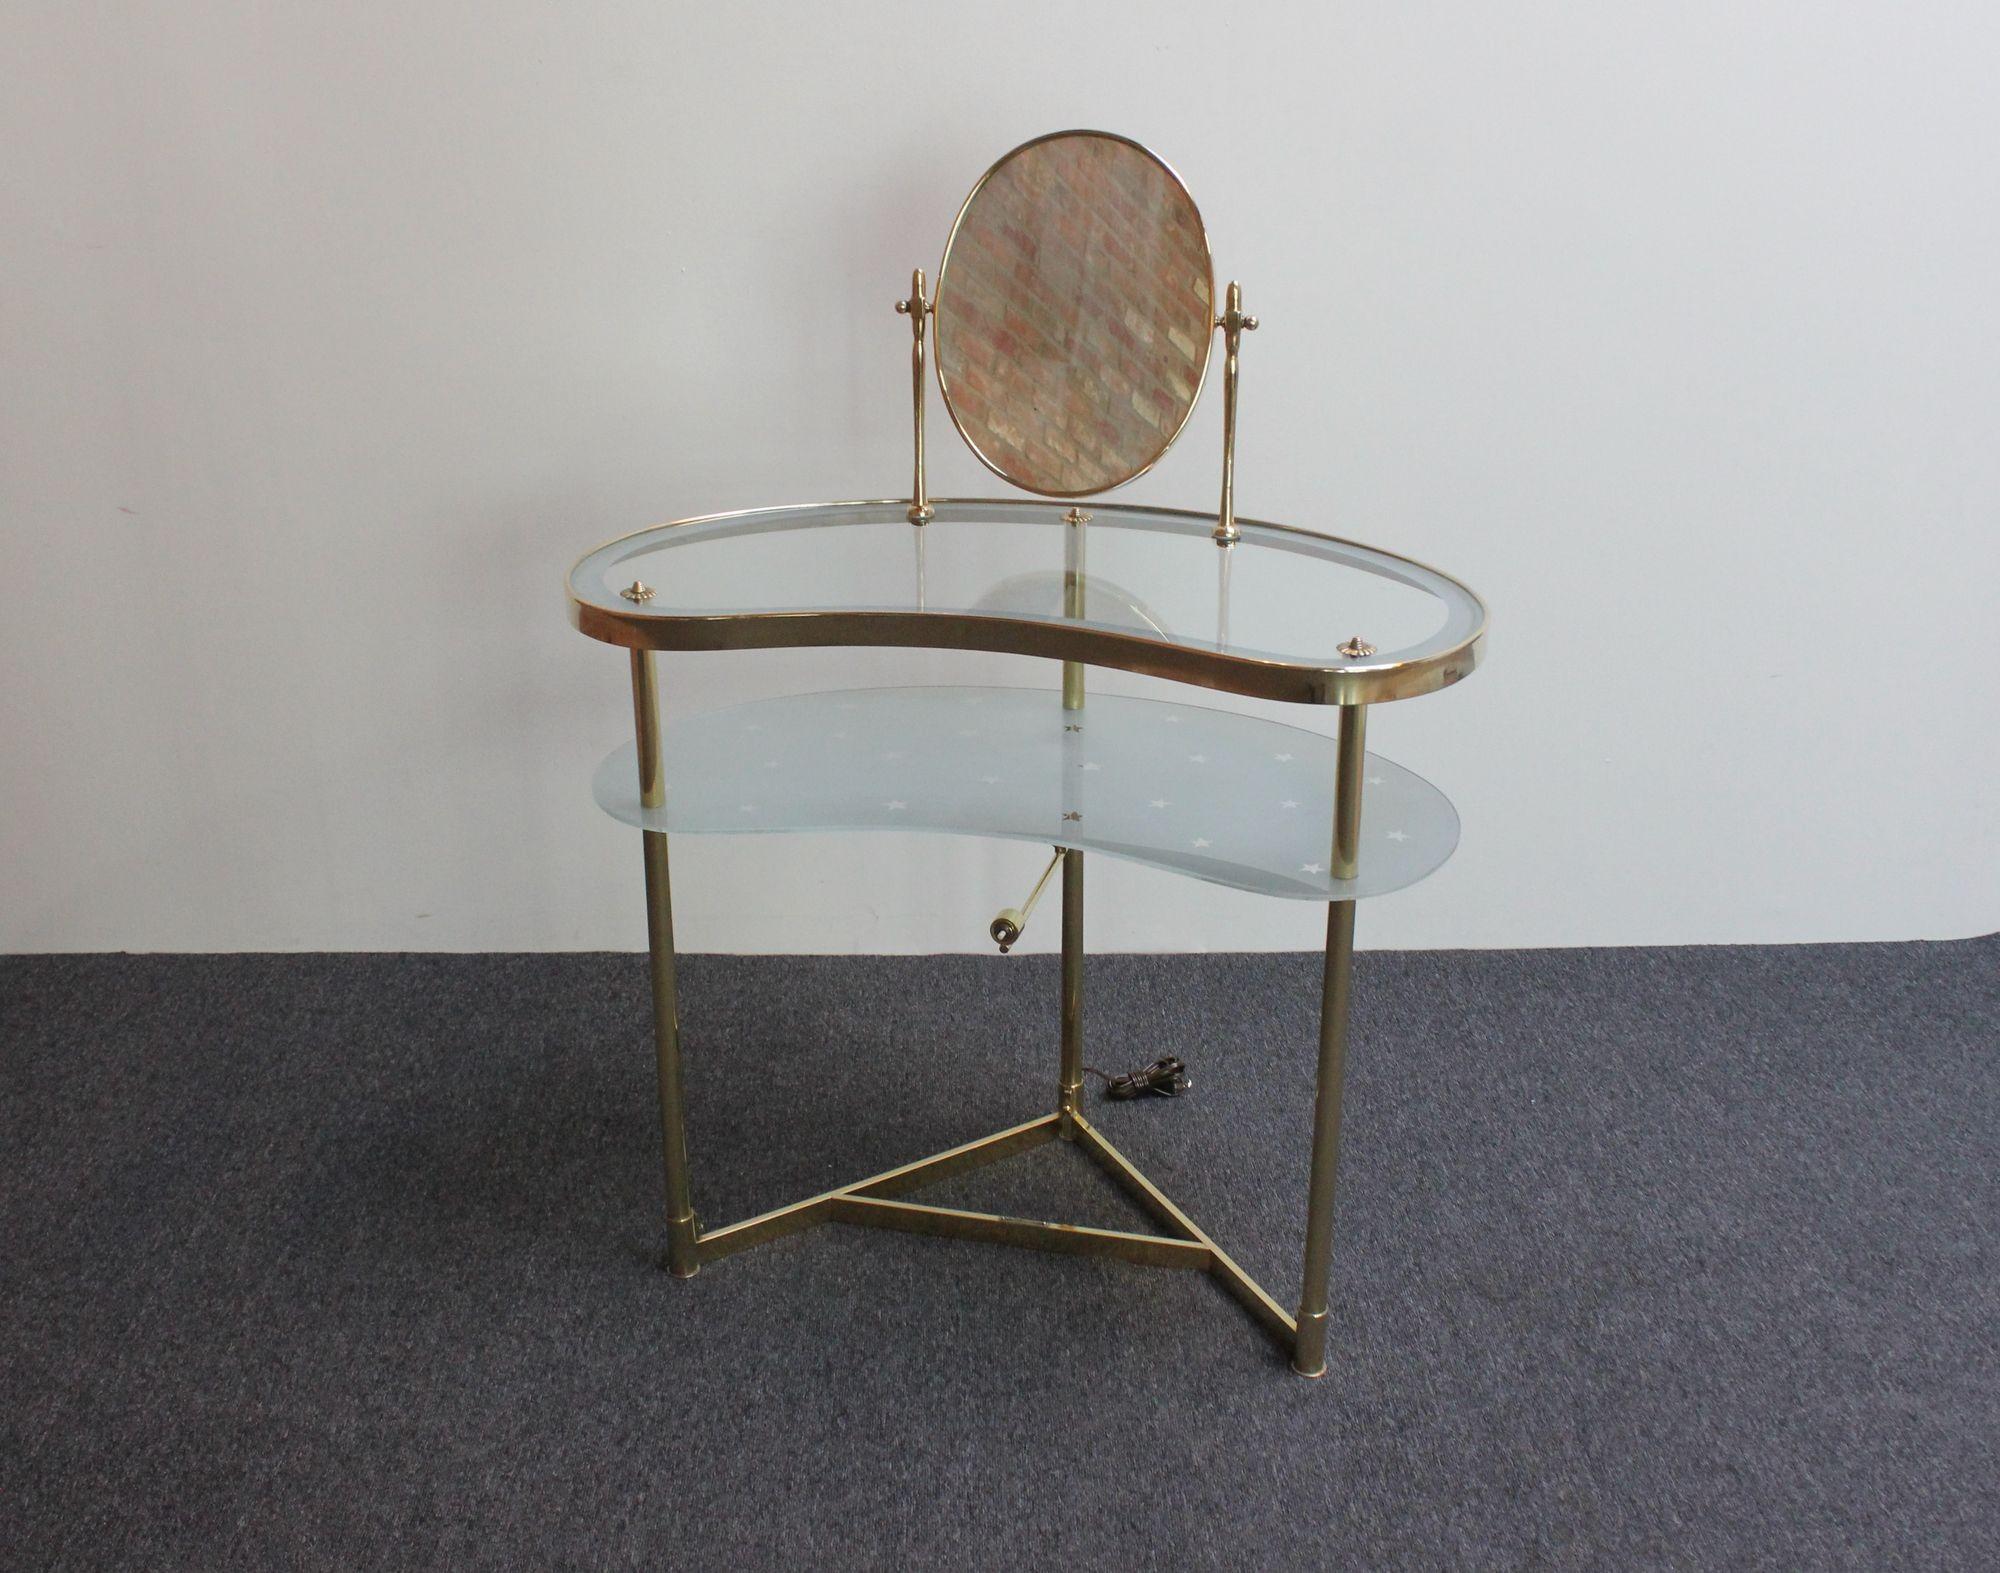 Elegant dressing table/vanity with illumination setting designed by Luigi Brusotti (ca. 1950s, Italy).
Composed of a swiveling brass-framed mirror mounted to a vanity table with a transparent glass top tier and frosted glass lower tier with etched